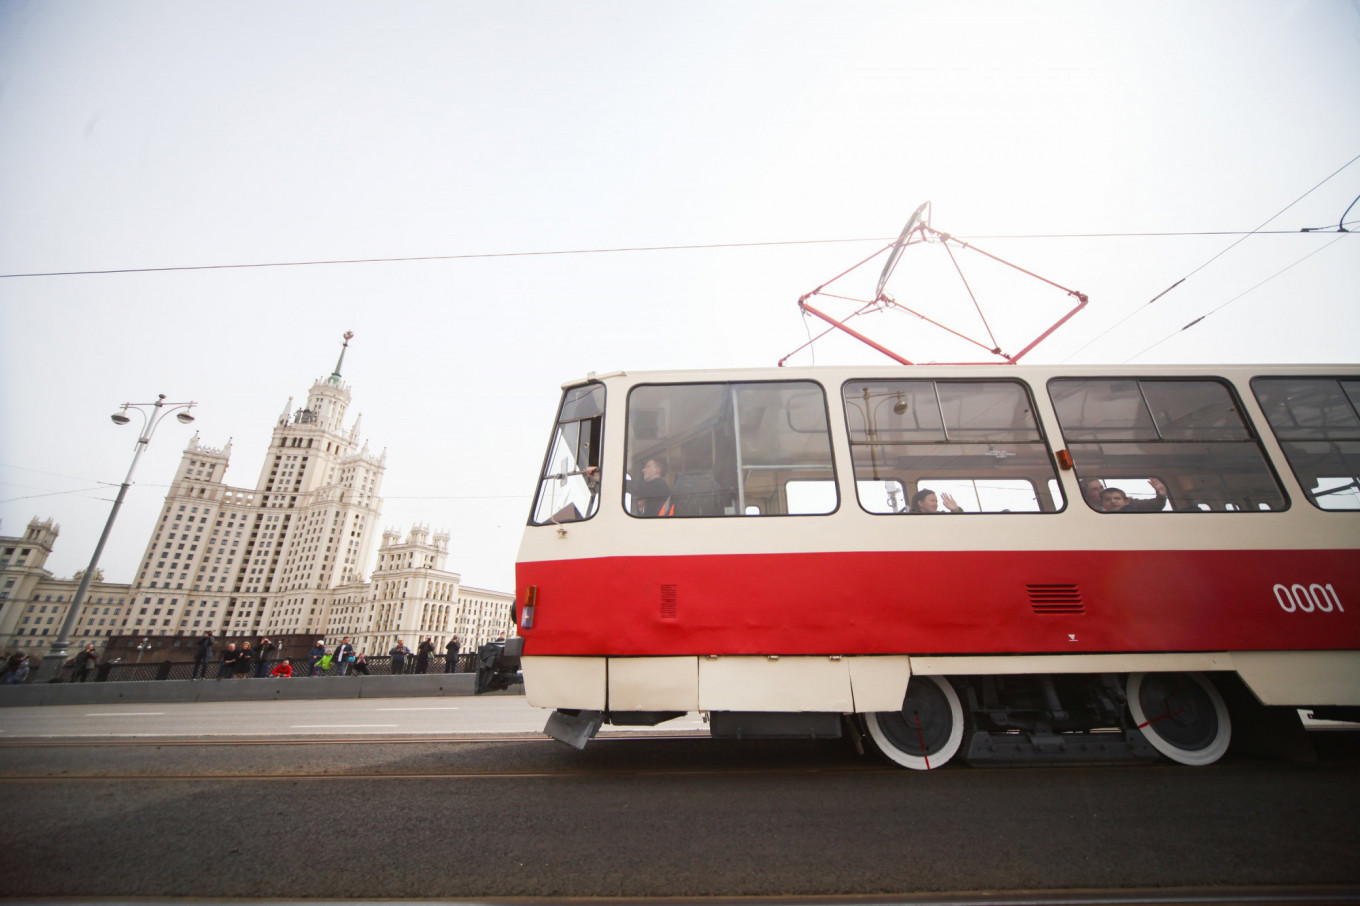 Vintage Tram Cars Parade Down Moscow’s Streets